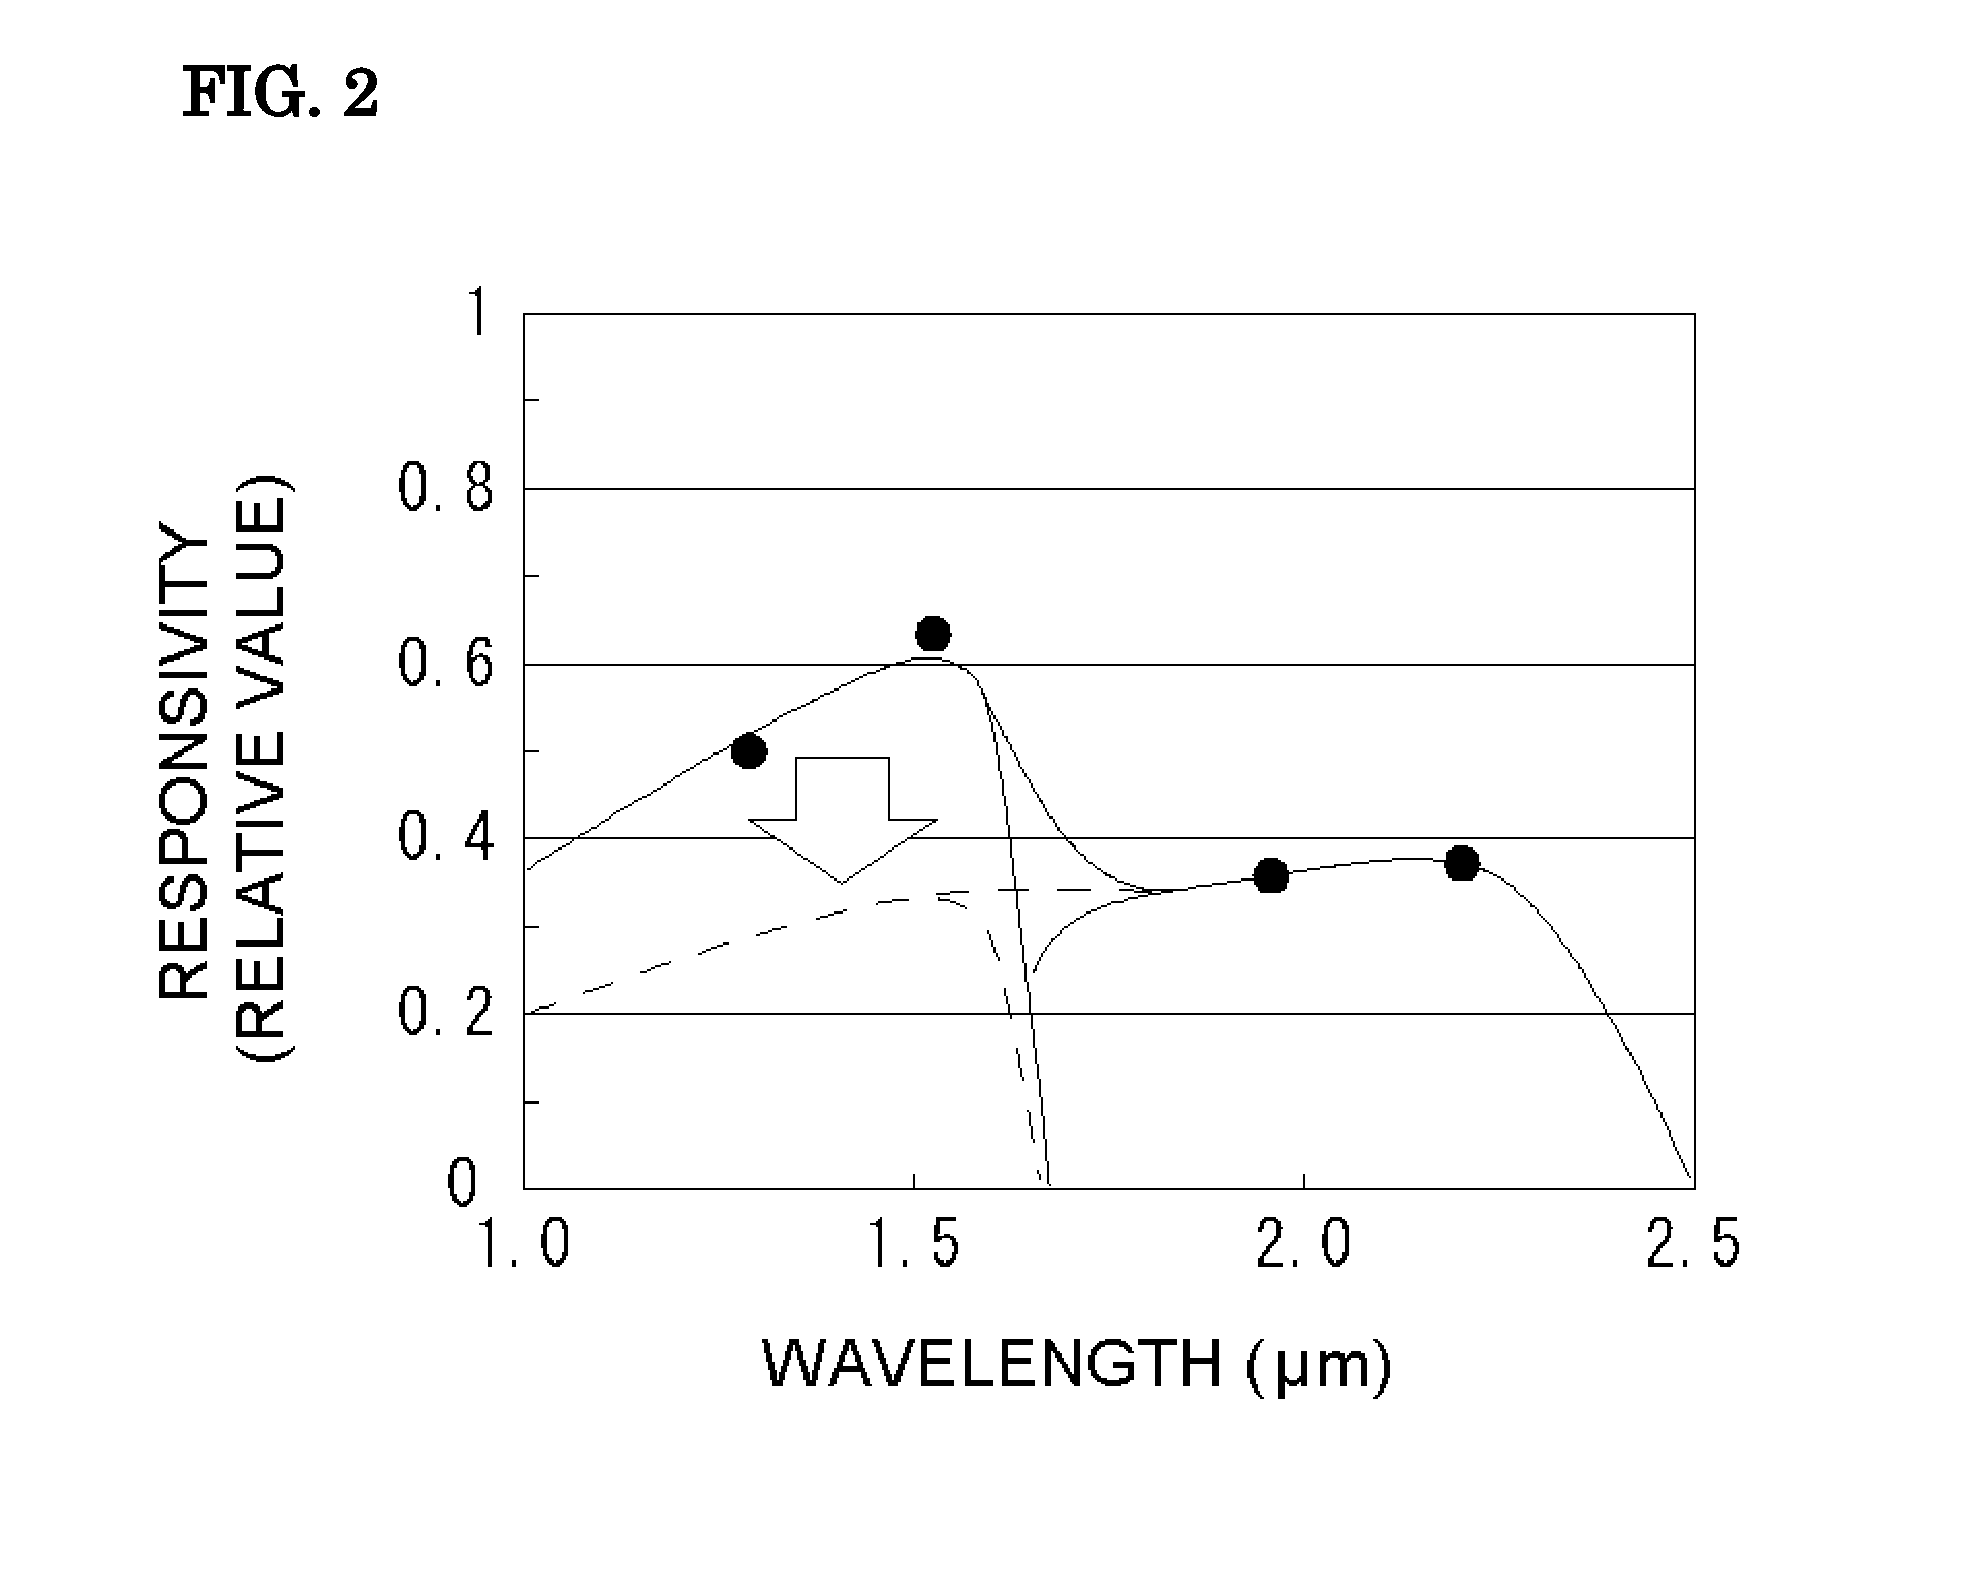 Light receiving element and optical device